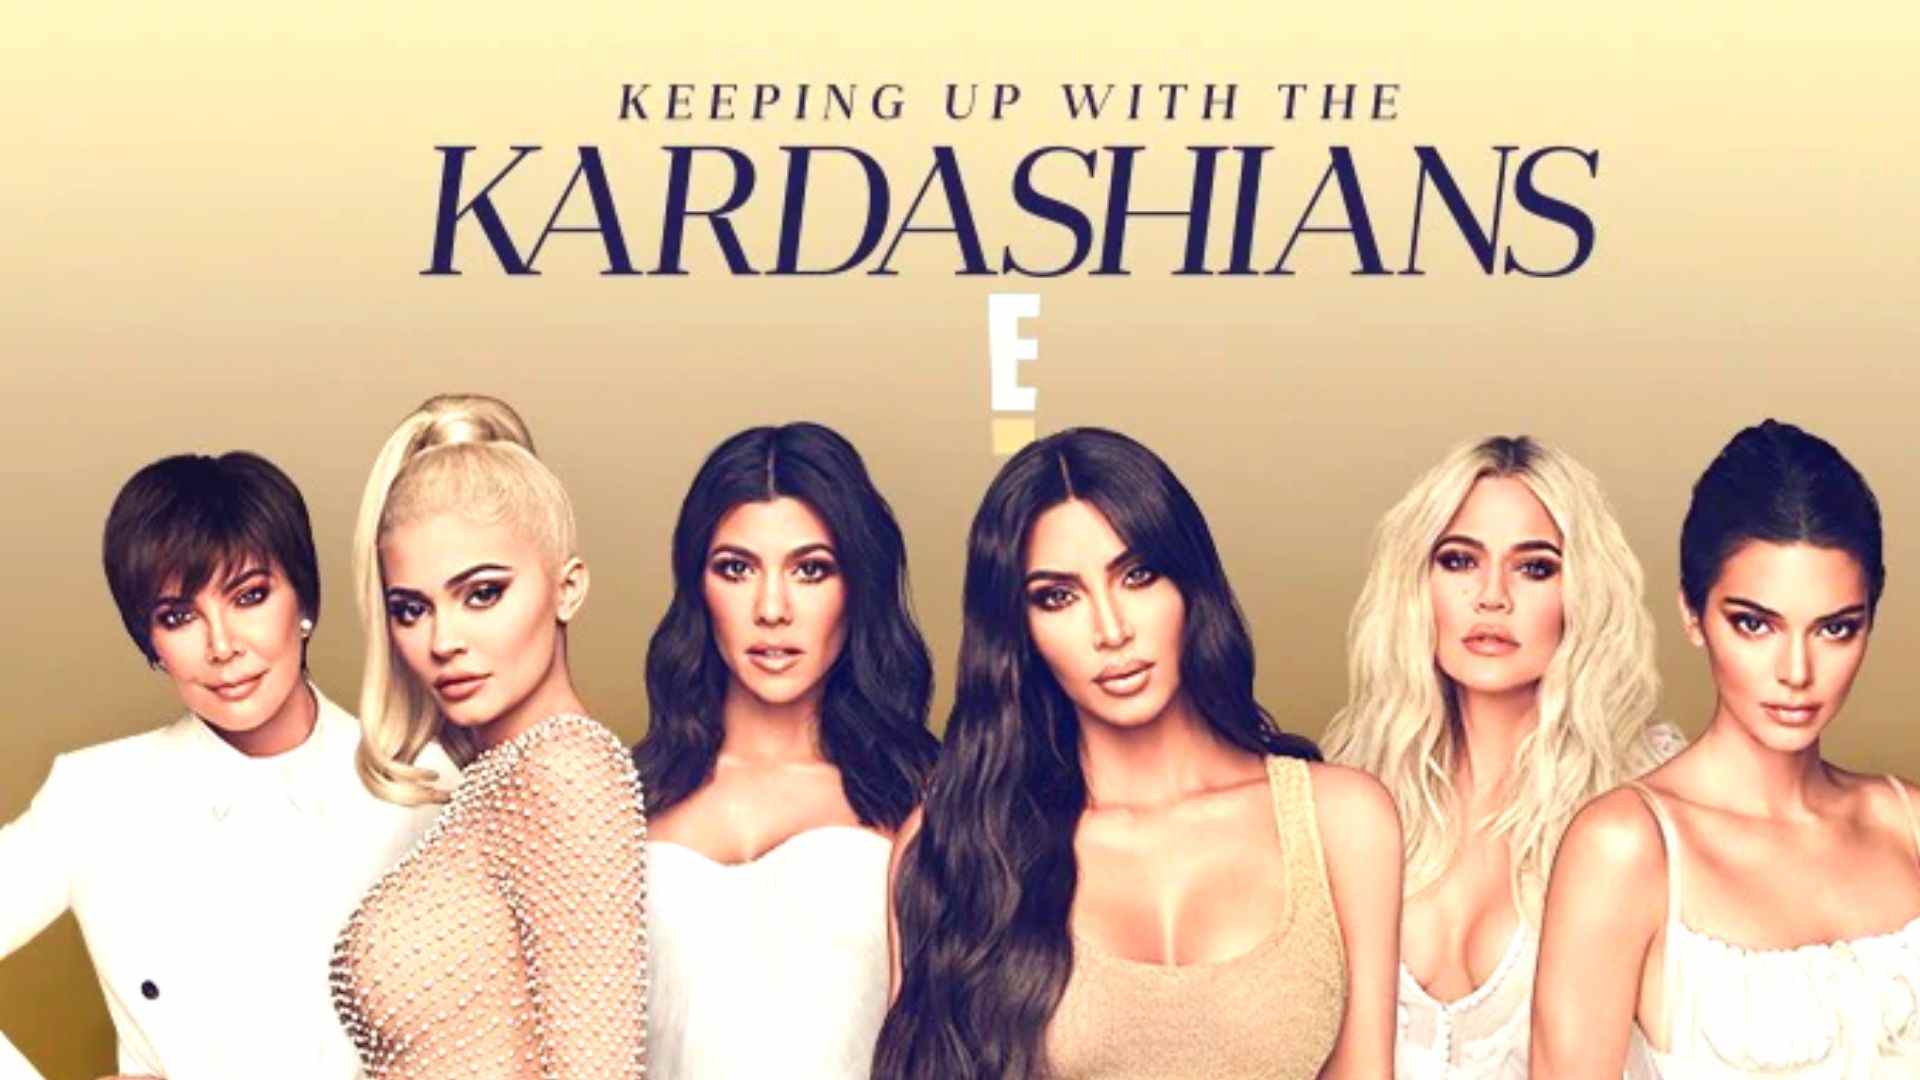 Keeping Up with the Kardashians wallpaper and images